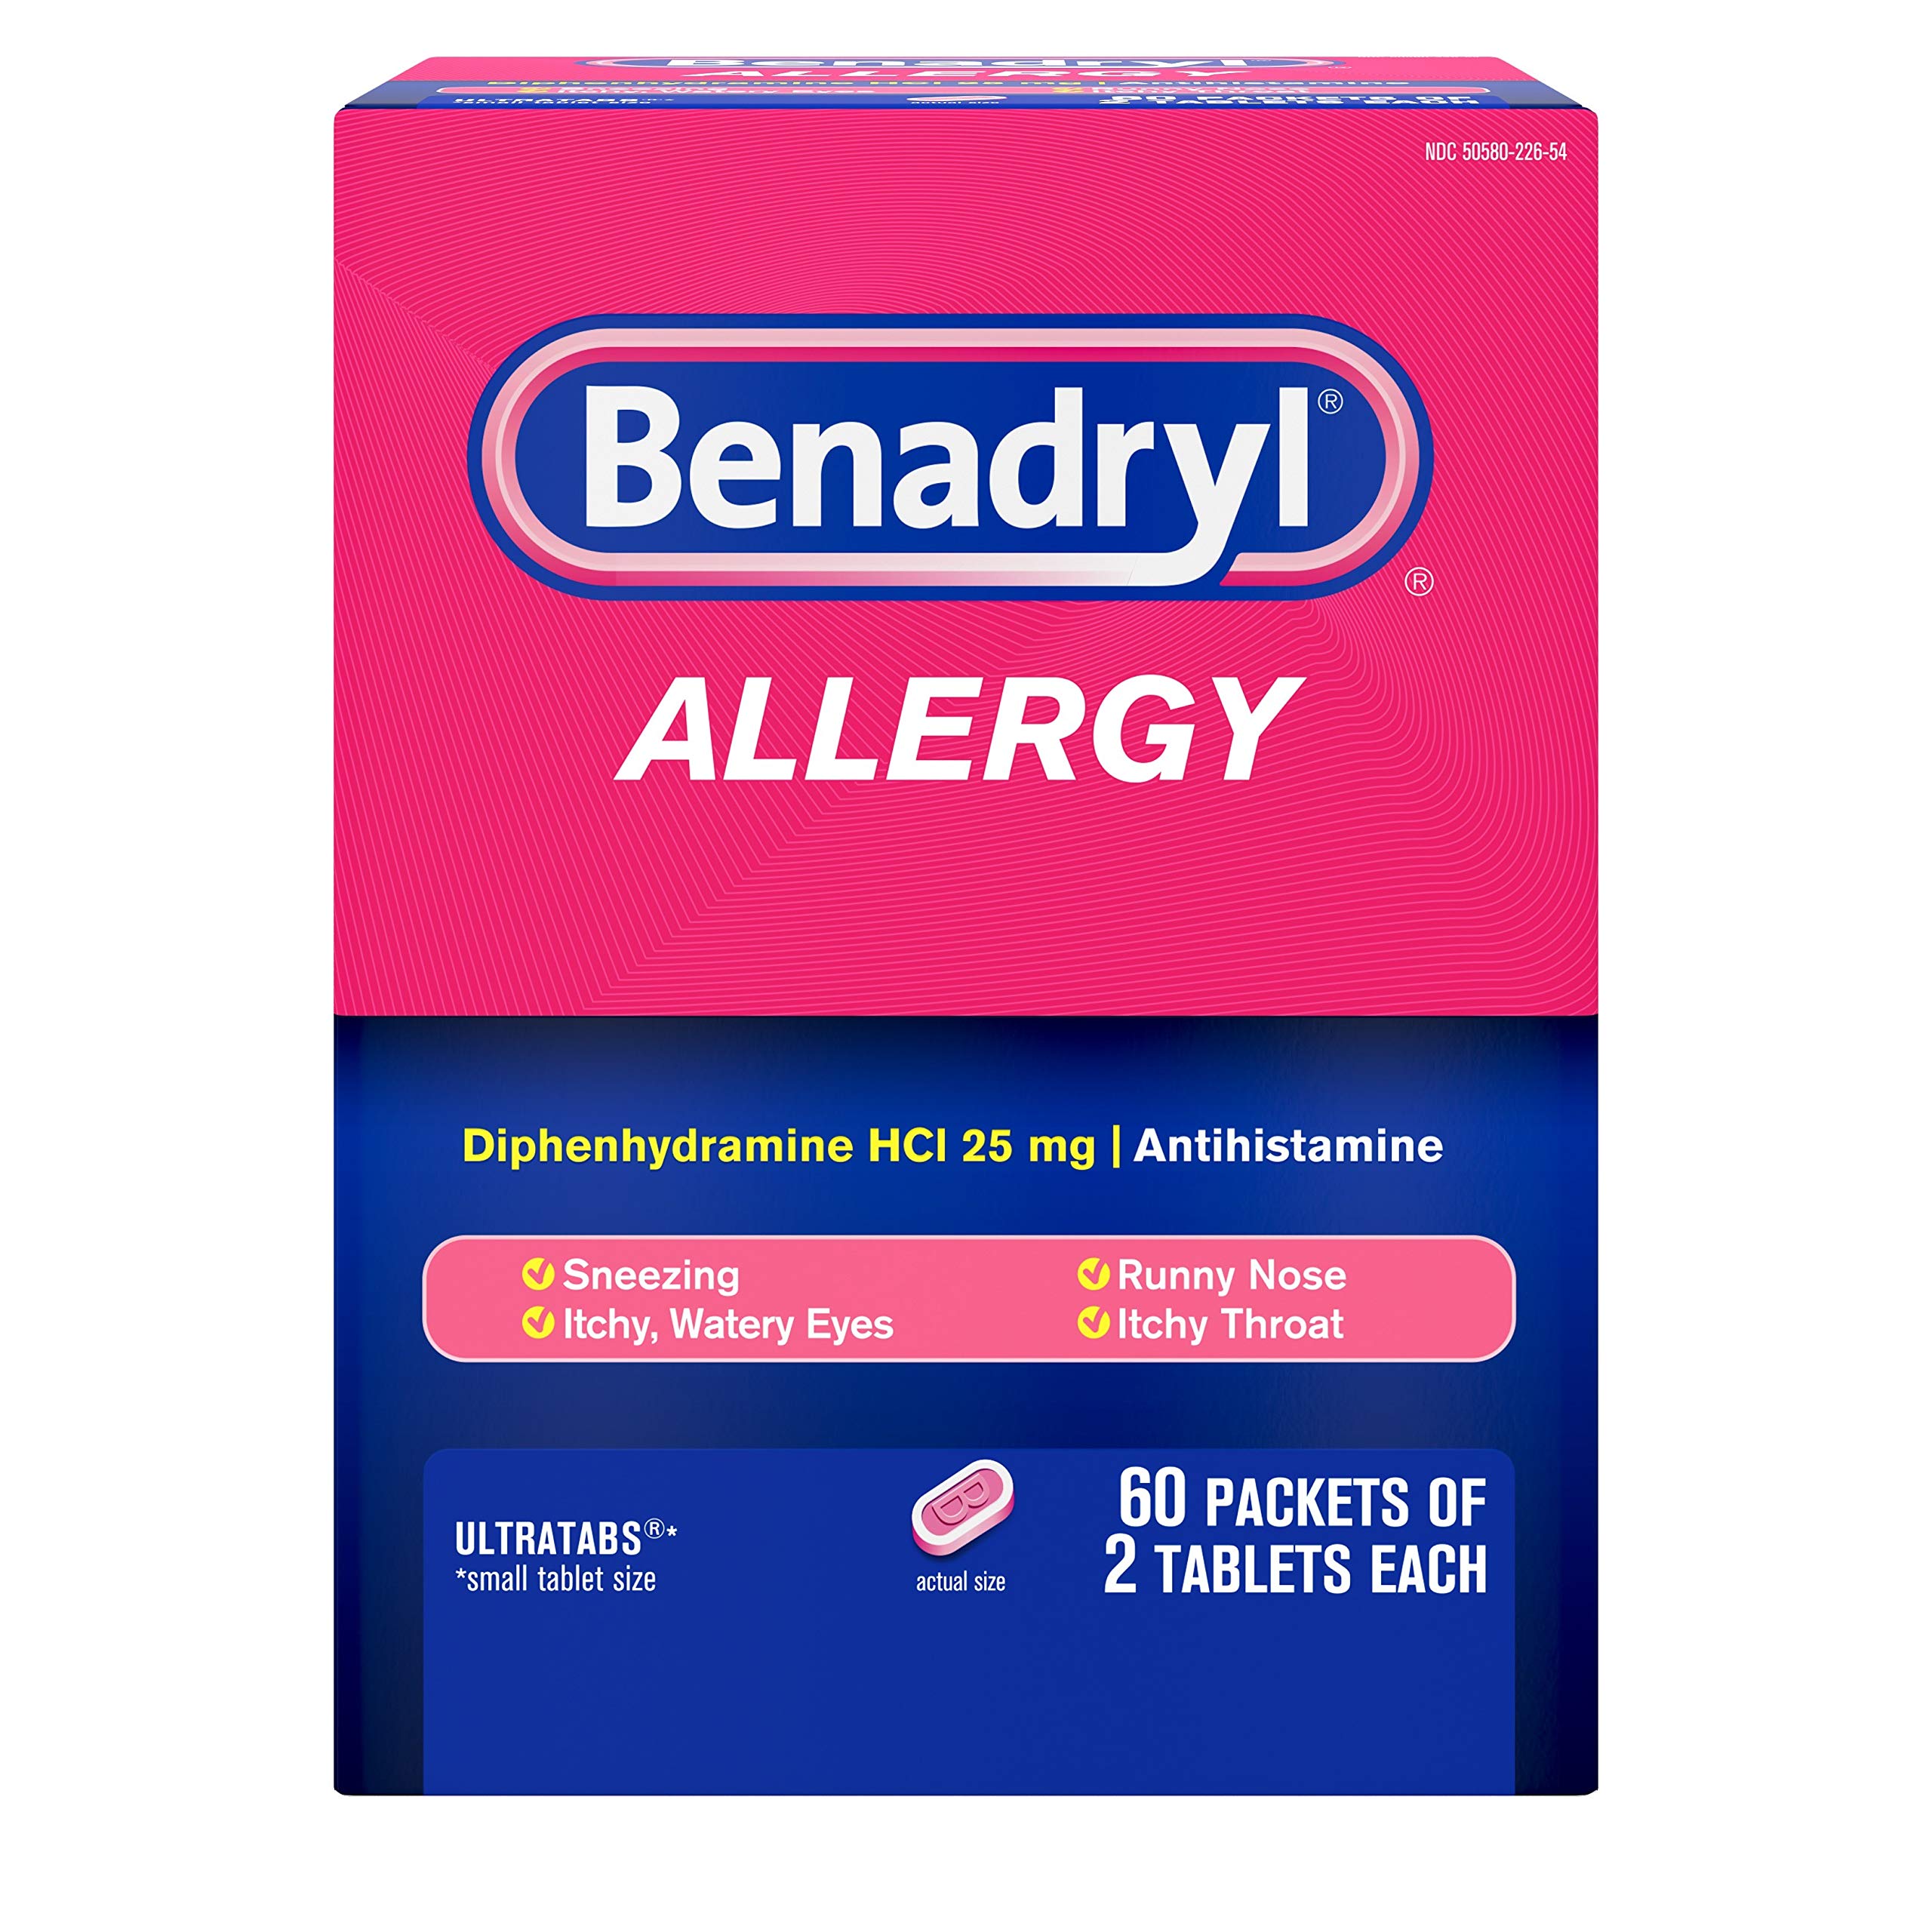 Book Cover Benadryl Ultratabs Go Packs, Antihistamine Allergy Medicine Tablets with Diphenhydramine HCl, Convenient for Travel & On-The-Go Cold & Allergy Relief, 60 Packets of 2 Tablets 60 Count (Pack of 1)